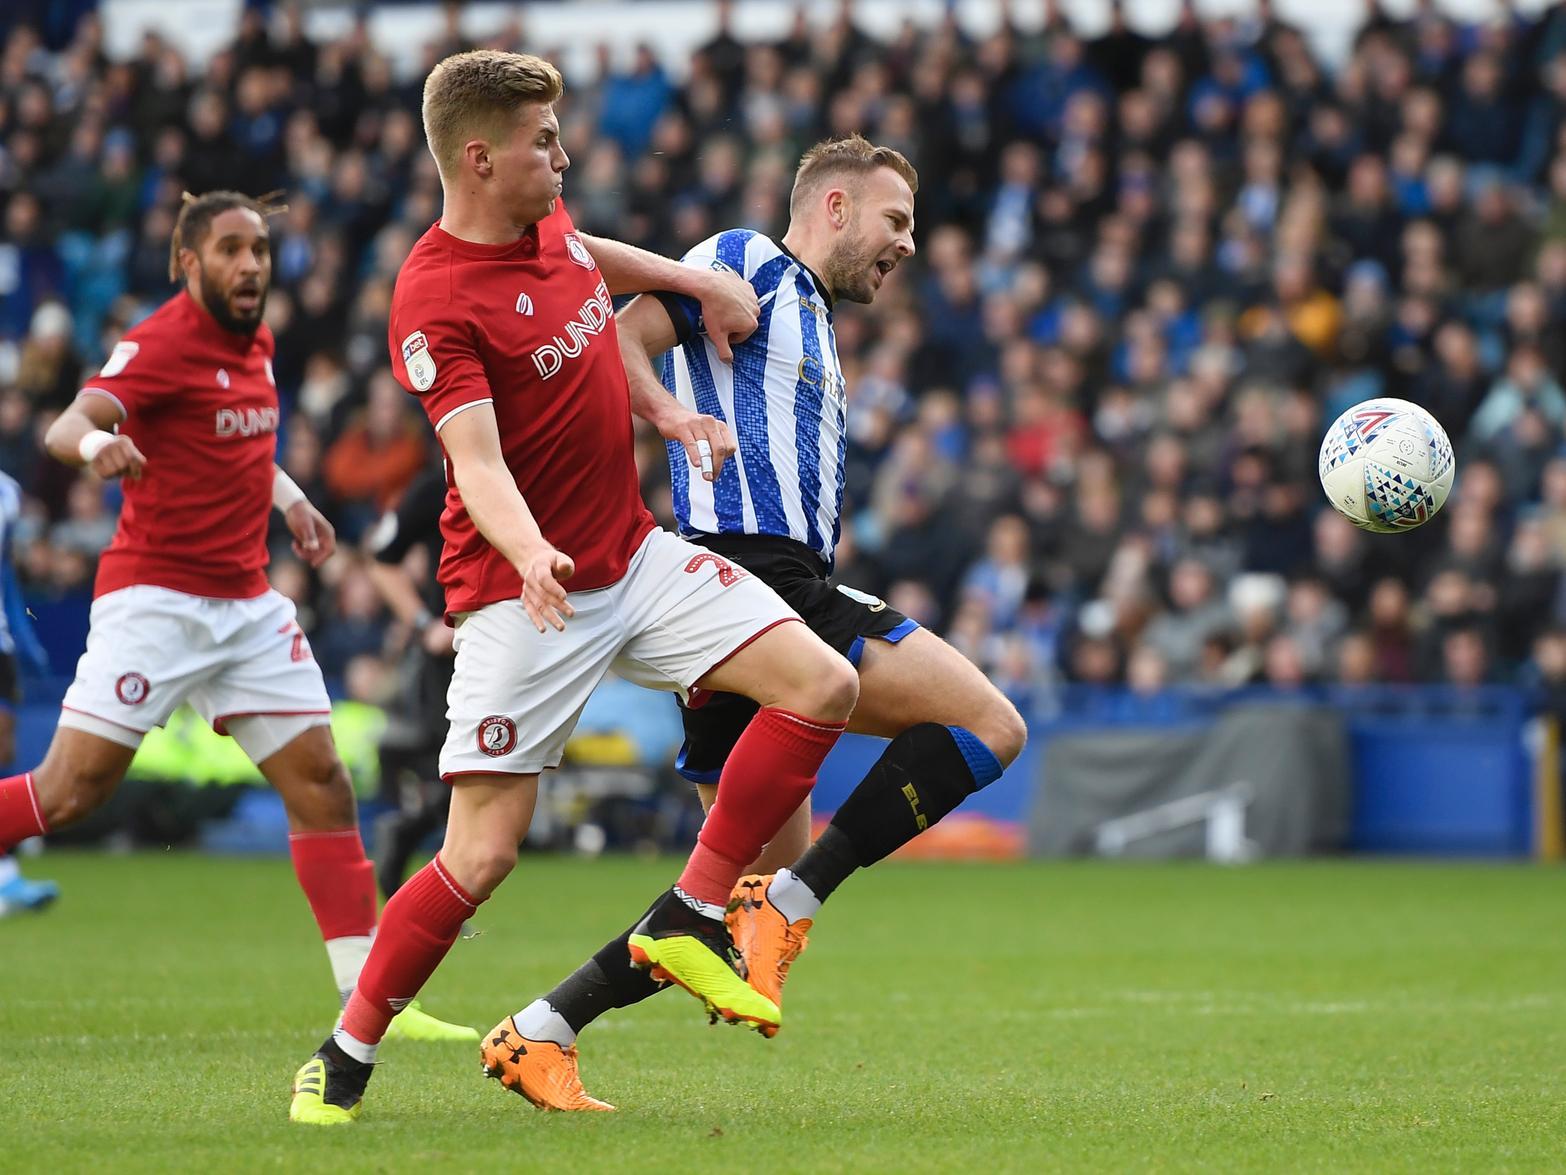 Celtic are said to be interested in pursuing a loan deal for Sheffield Wednesday's Jordan Rhodes, although the striker is more likely to remain at Hillsborough until at least the summer. (Football Insider)